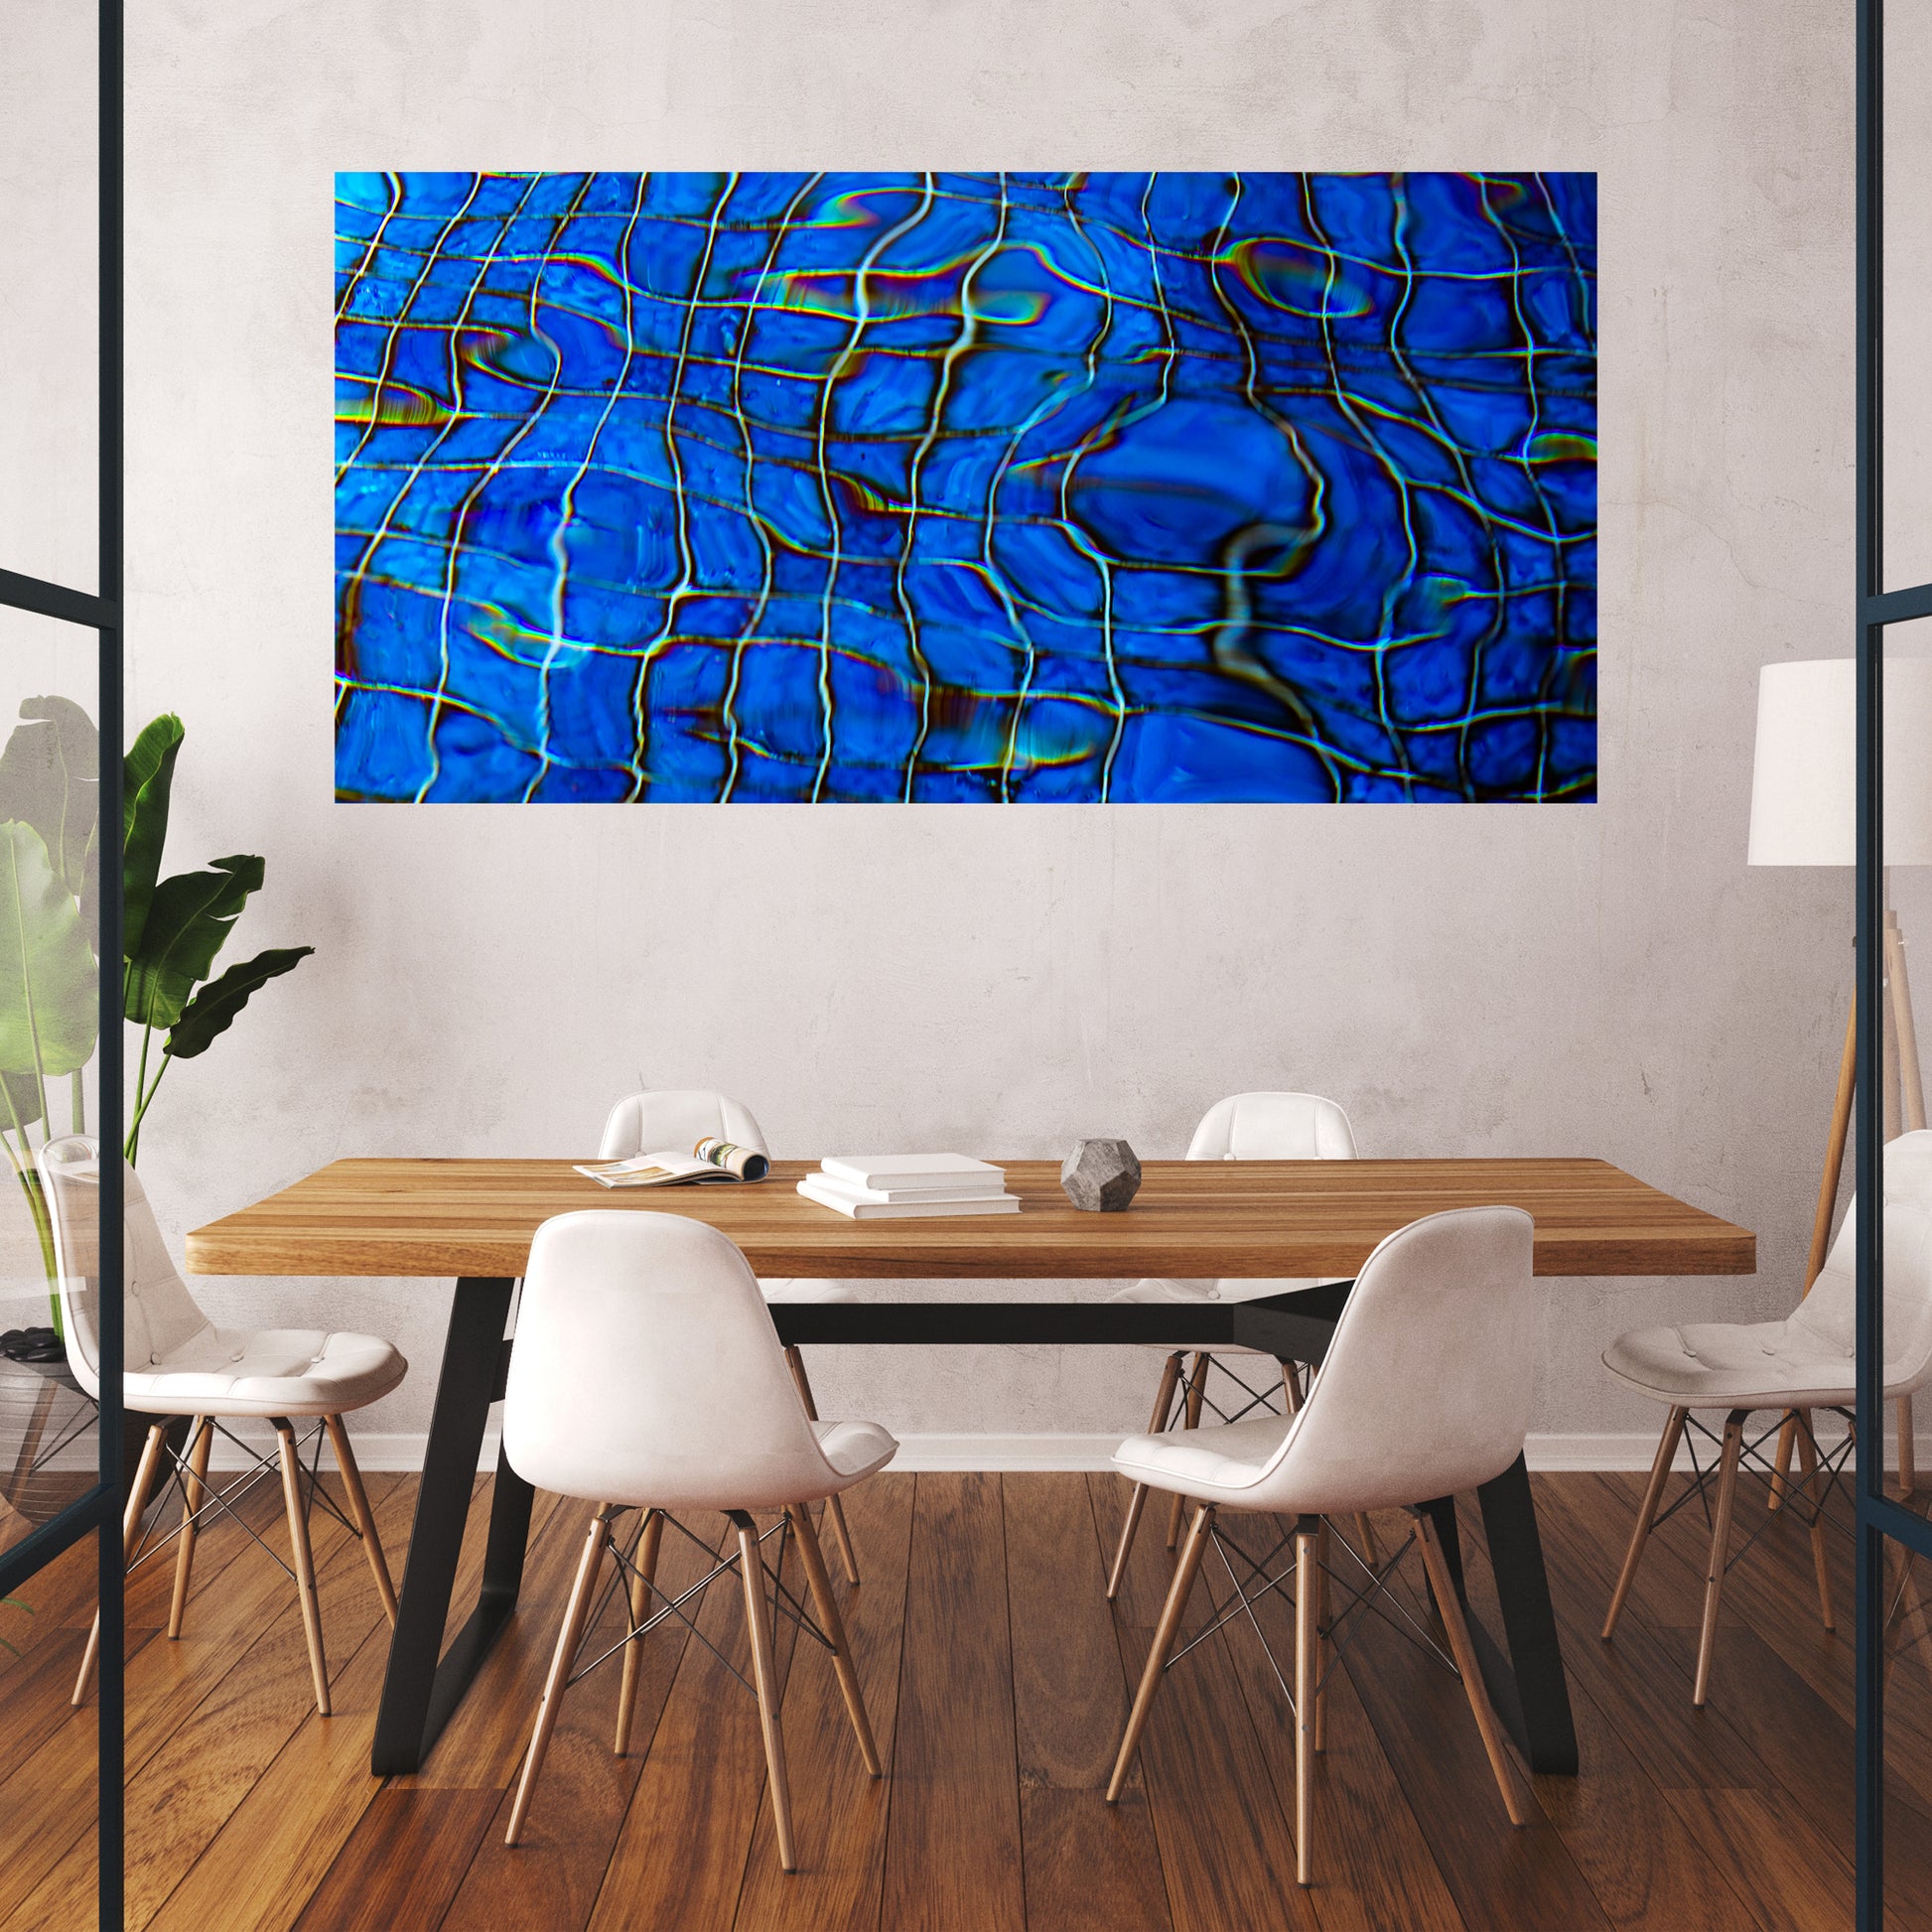 blue abstract disturbed pool lines create pattern in this large wall art decor hanging in a conference room